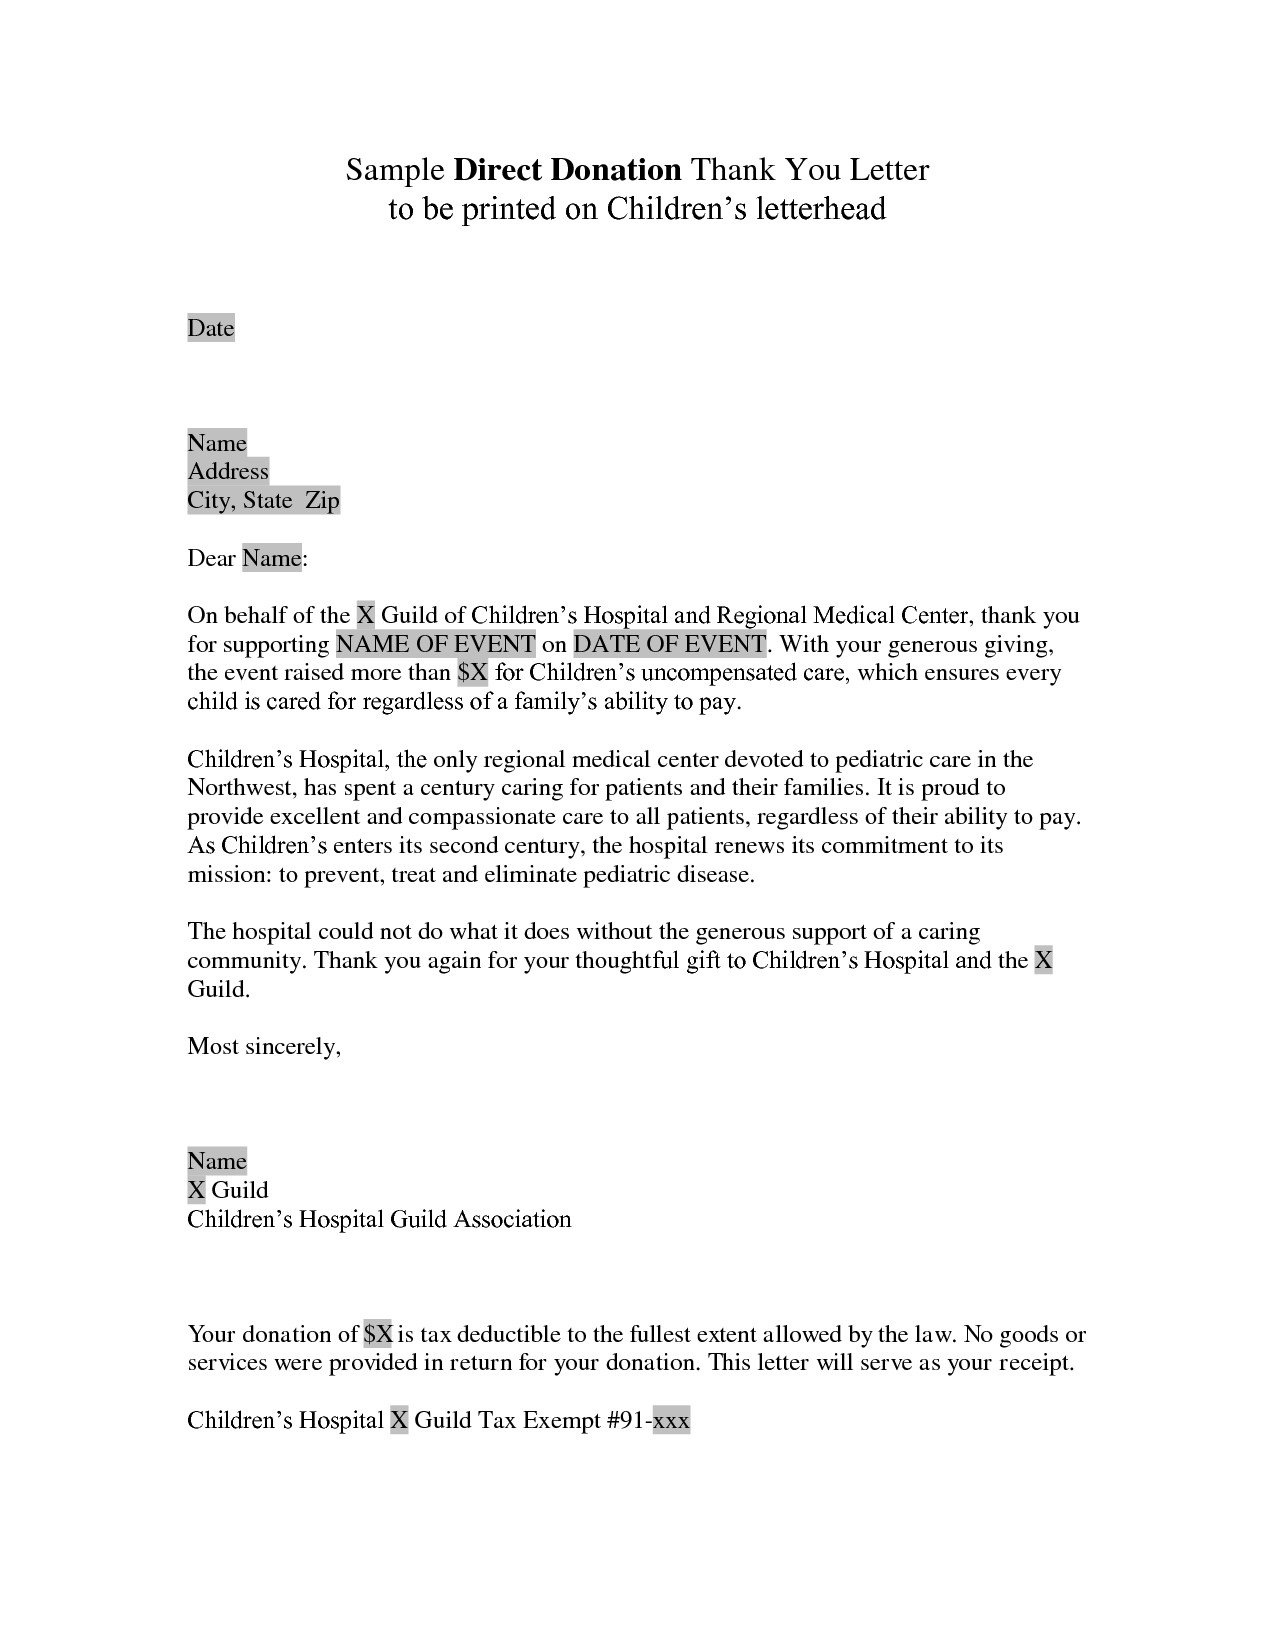 Donation Thank You Letter Template Examples